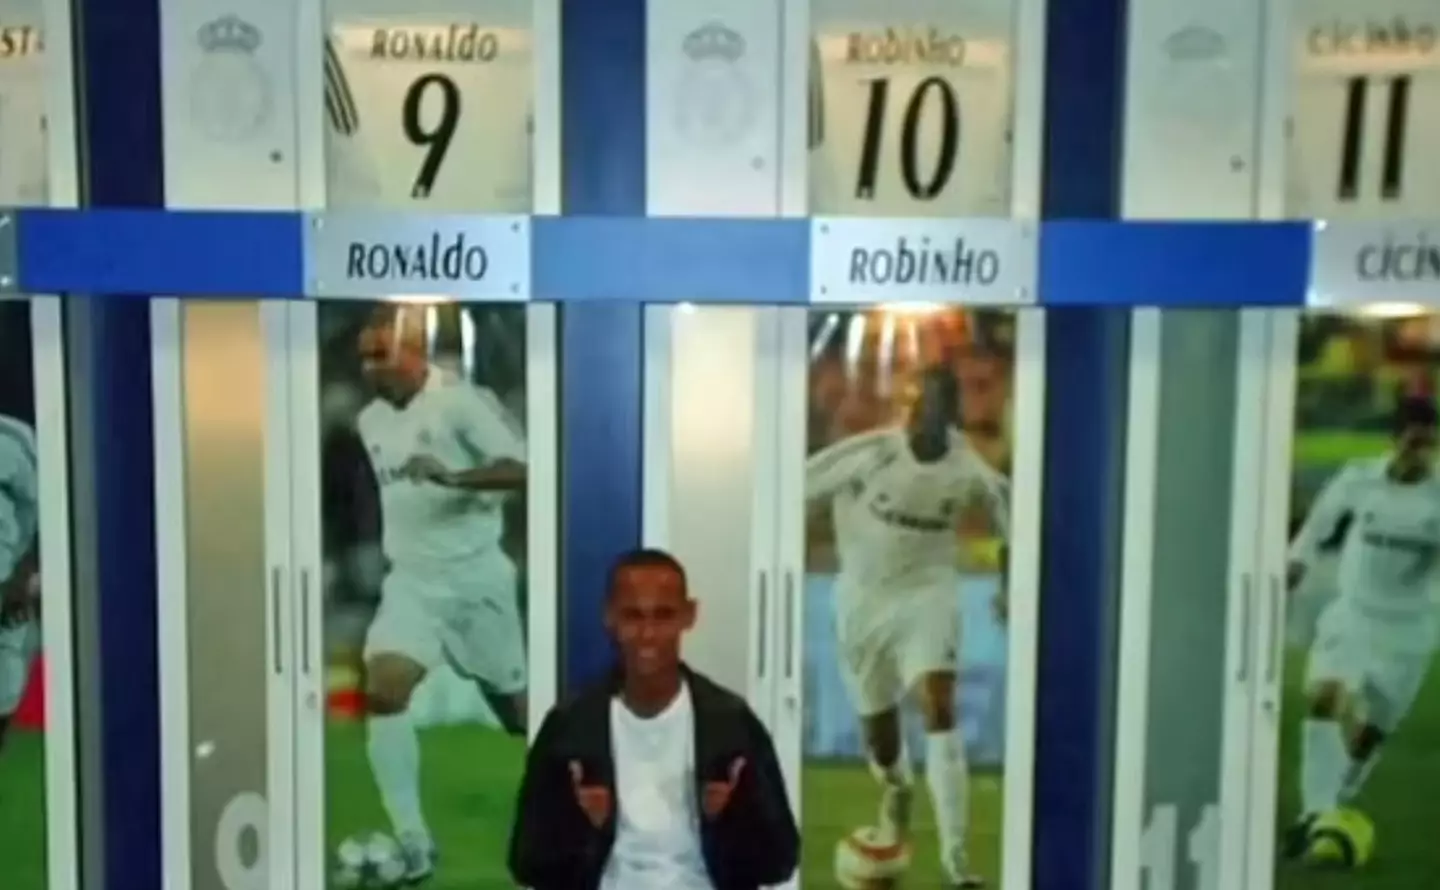 Neymar grins while posing in the Real Madrid dressing room (Image: AS)